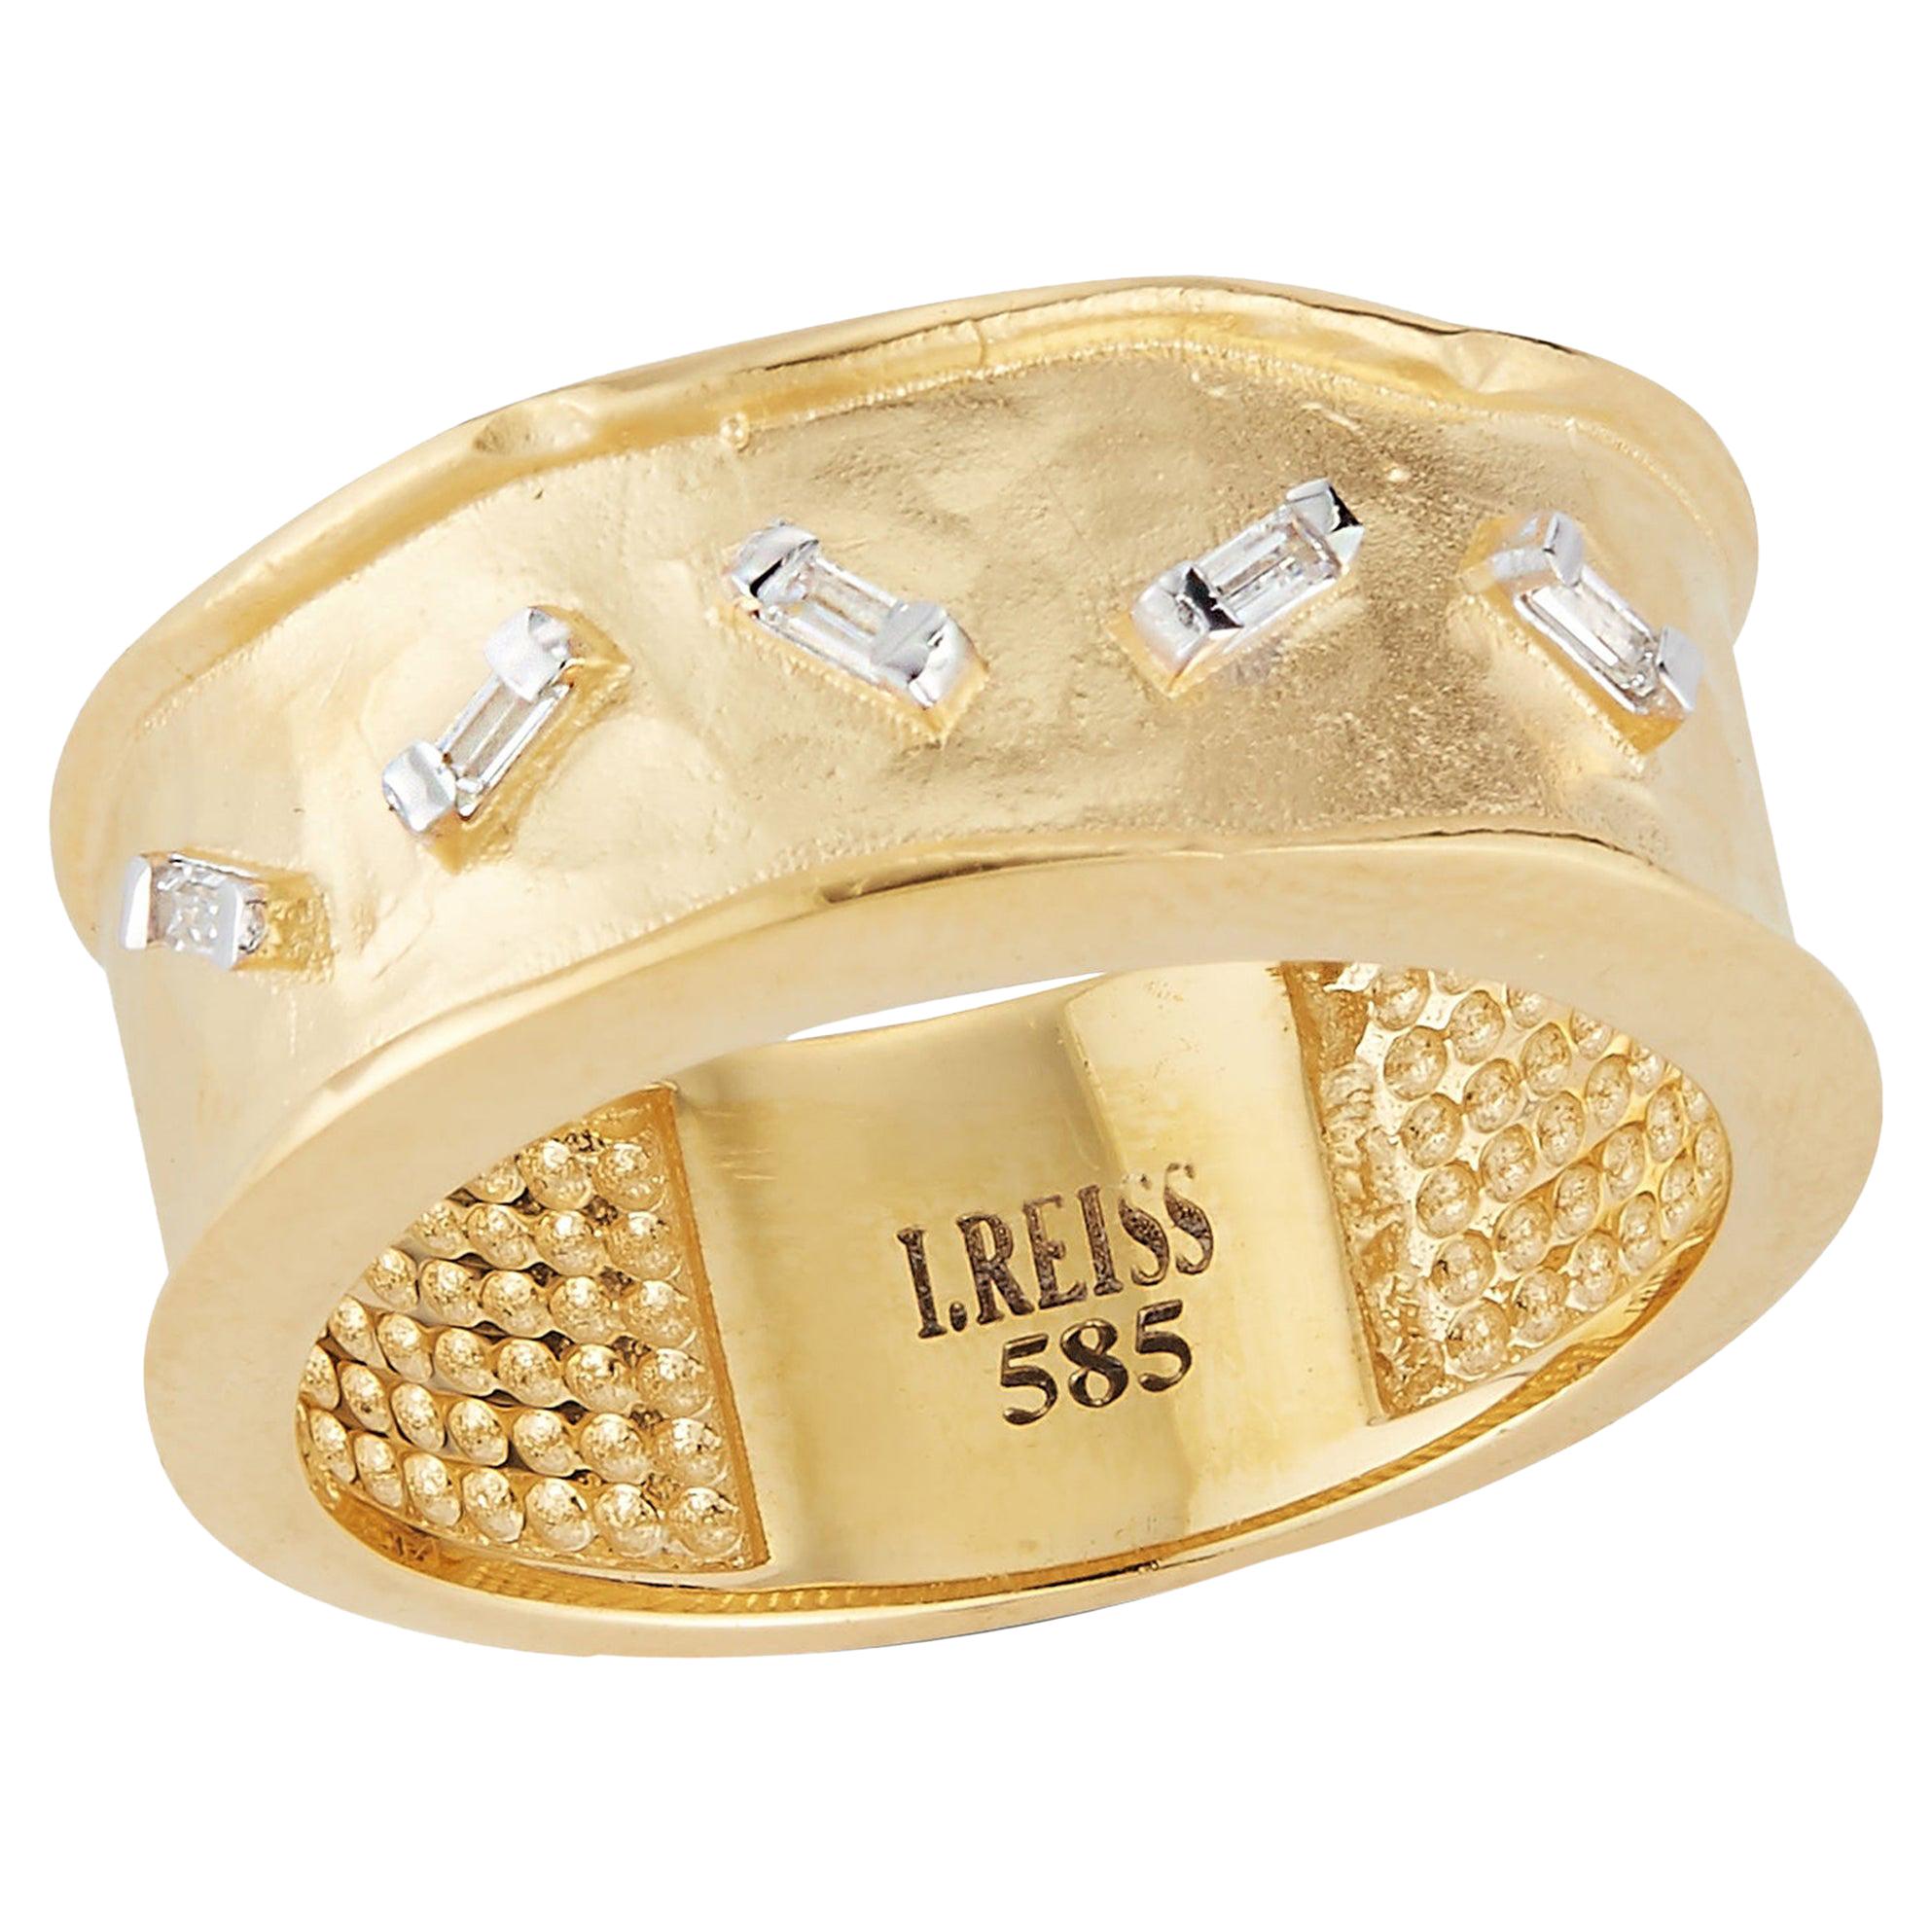 Handcrafted 14 Karat Yellow Gold Ring Set with Scattered Baguette Diamonds